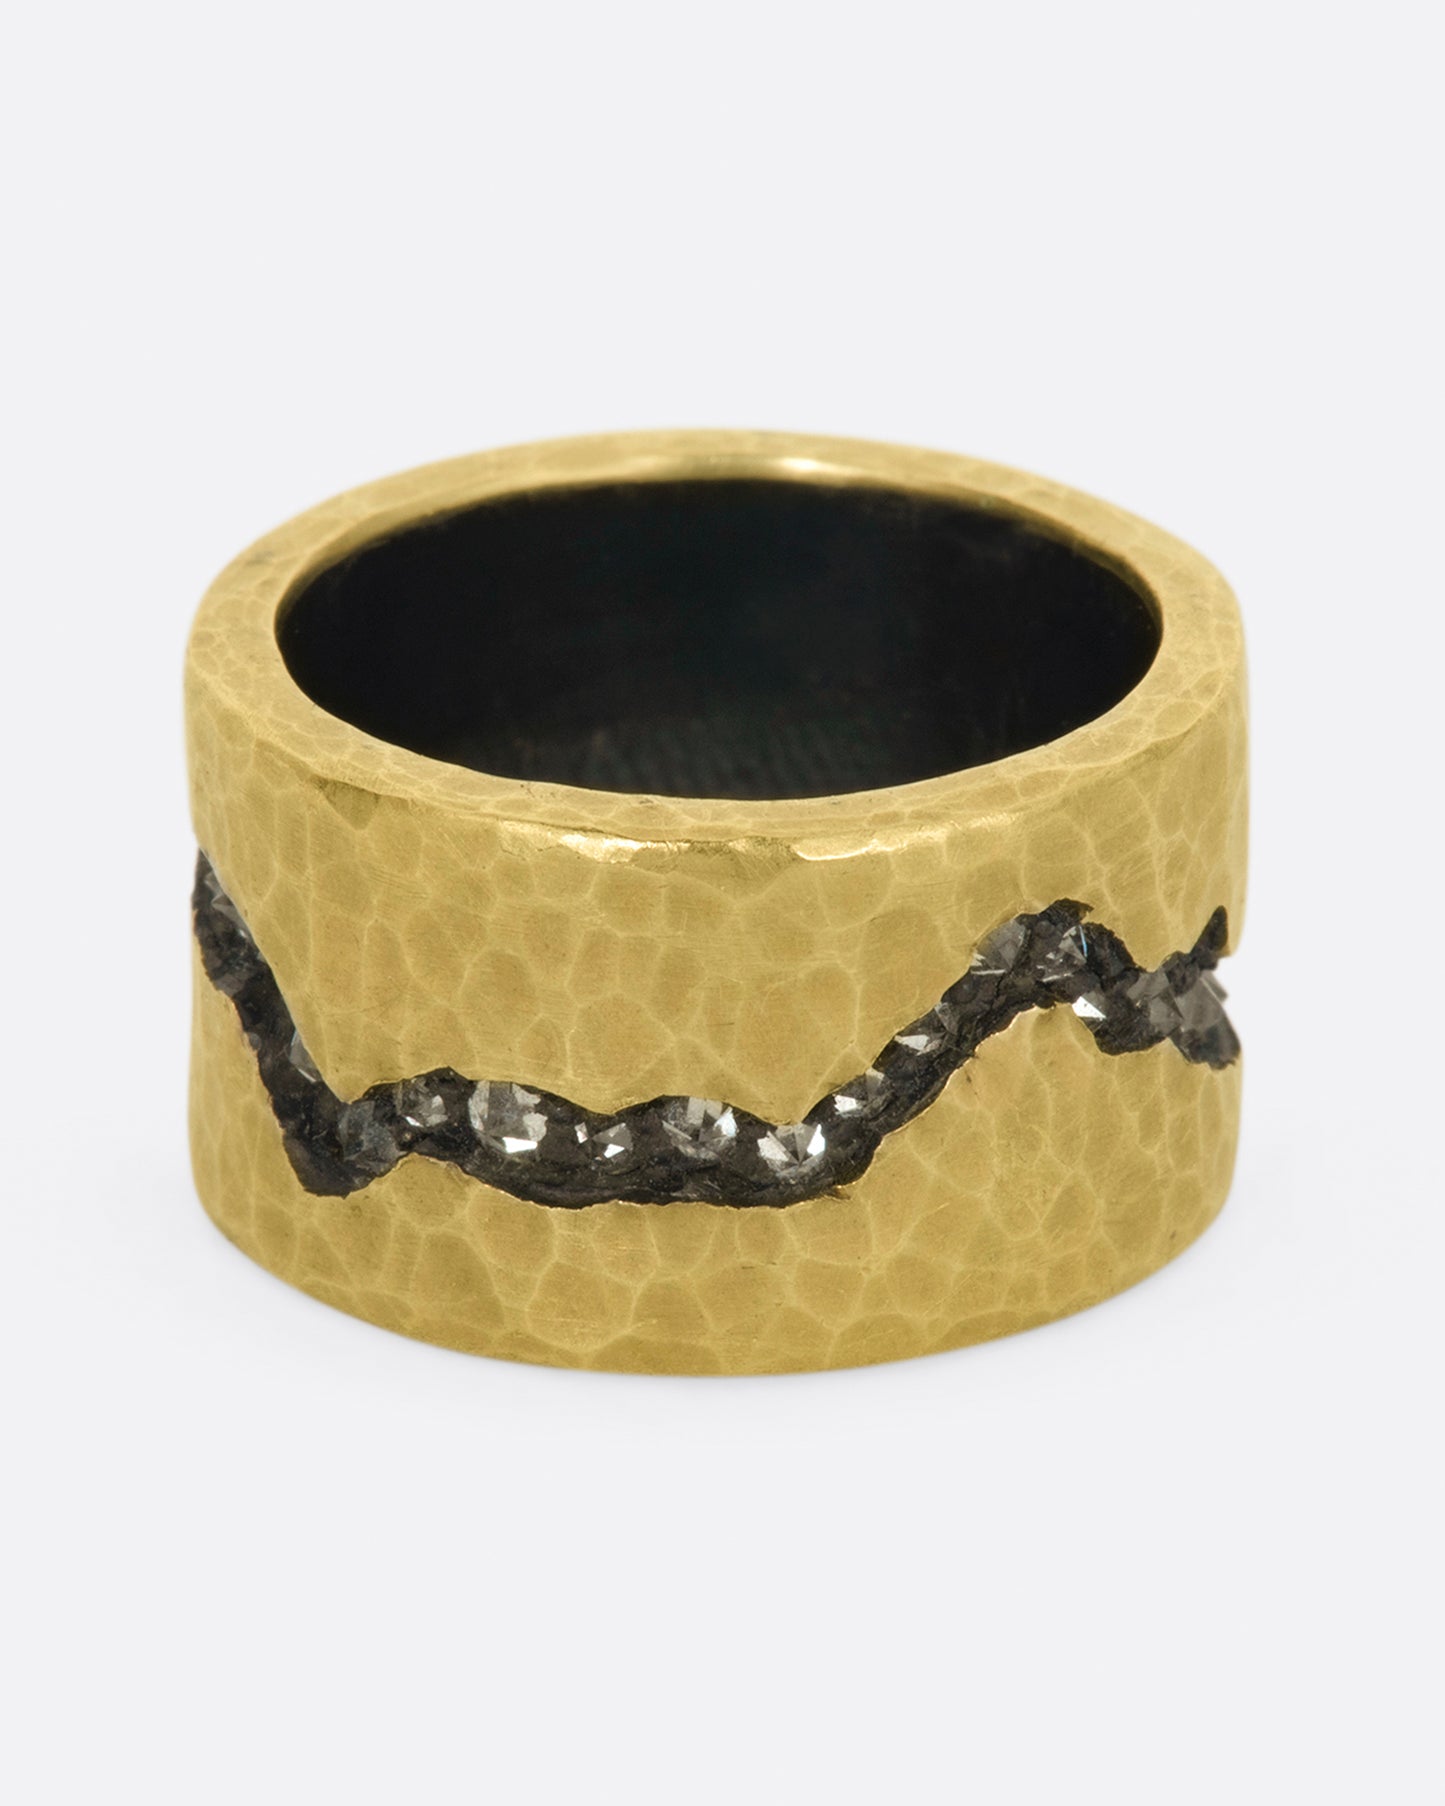 A wide sterling silver band ring with a layer of hammered 18k yellow gold on top and a fissure all the way around that's lined with inverted diamonds.